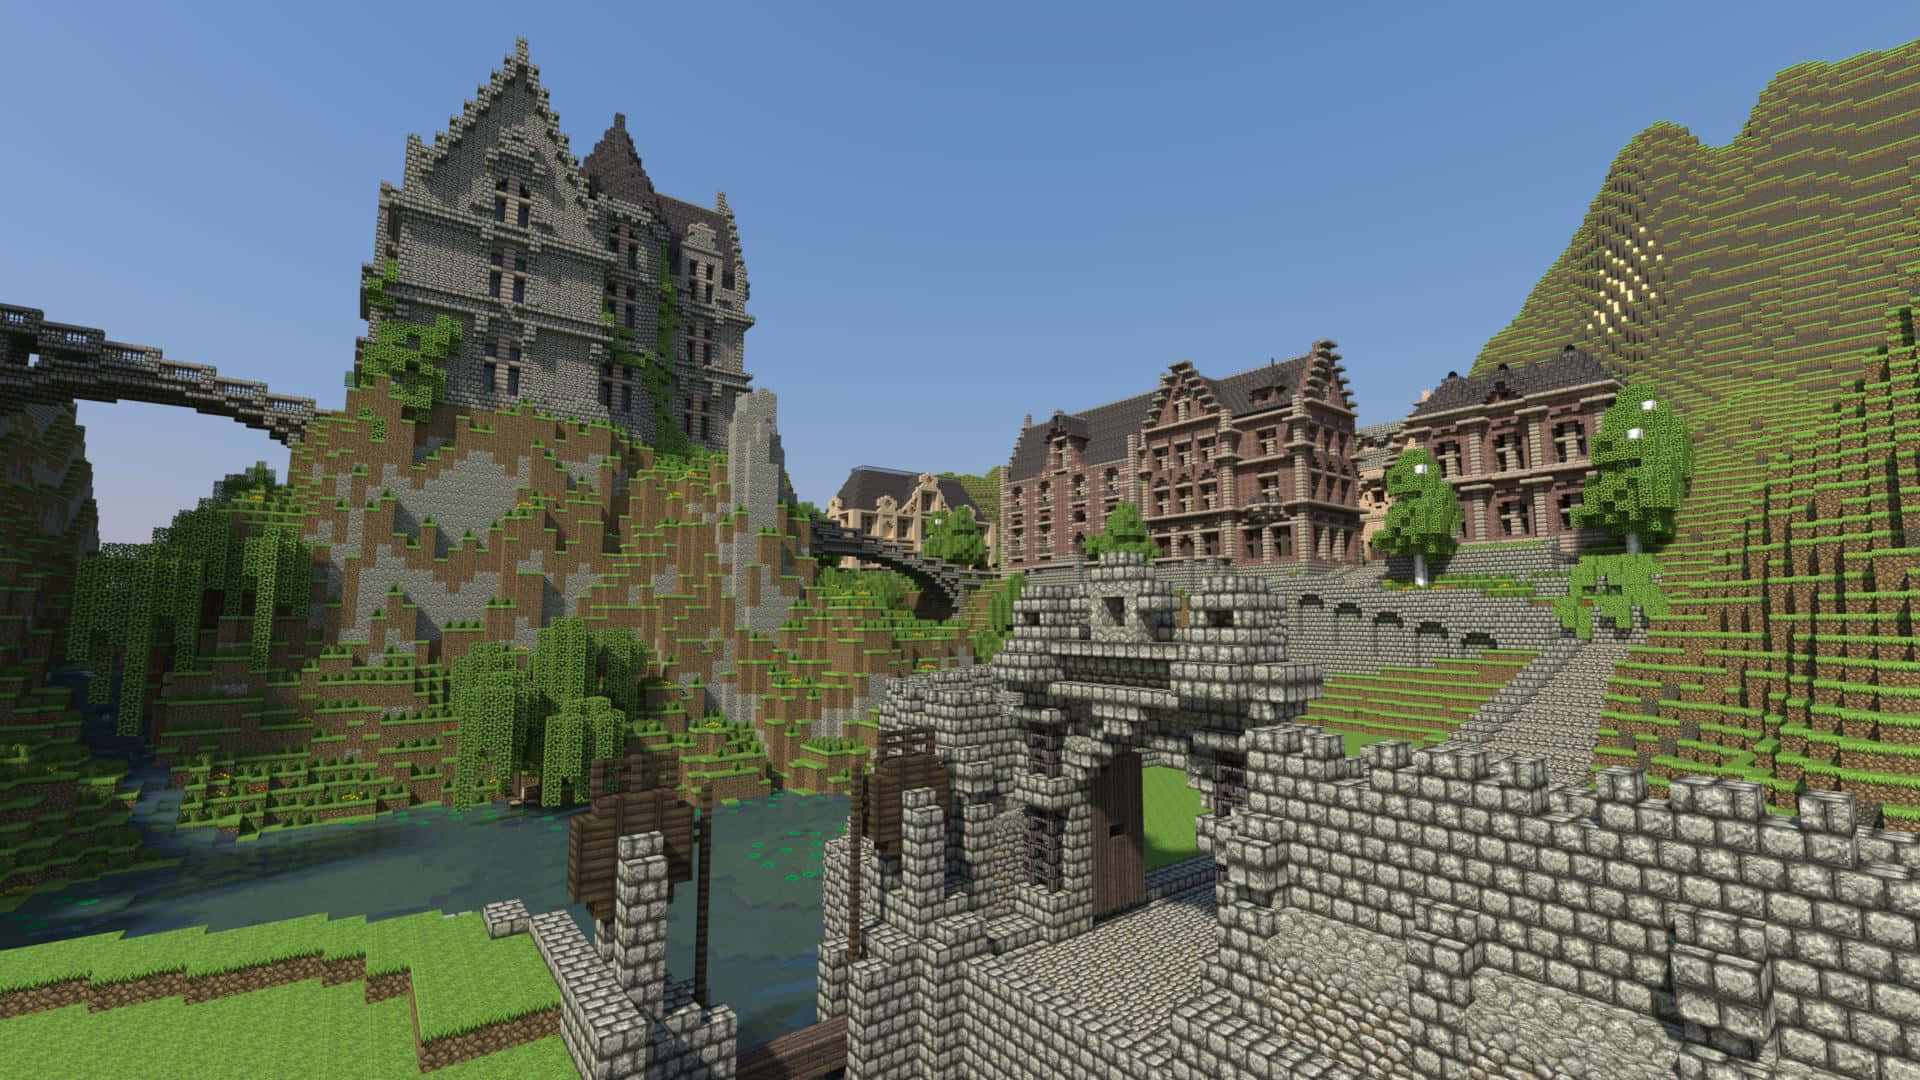 “Uniquely crafted Minecraft Houses for creativity and relaxation”